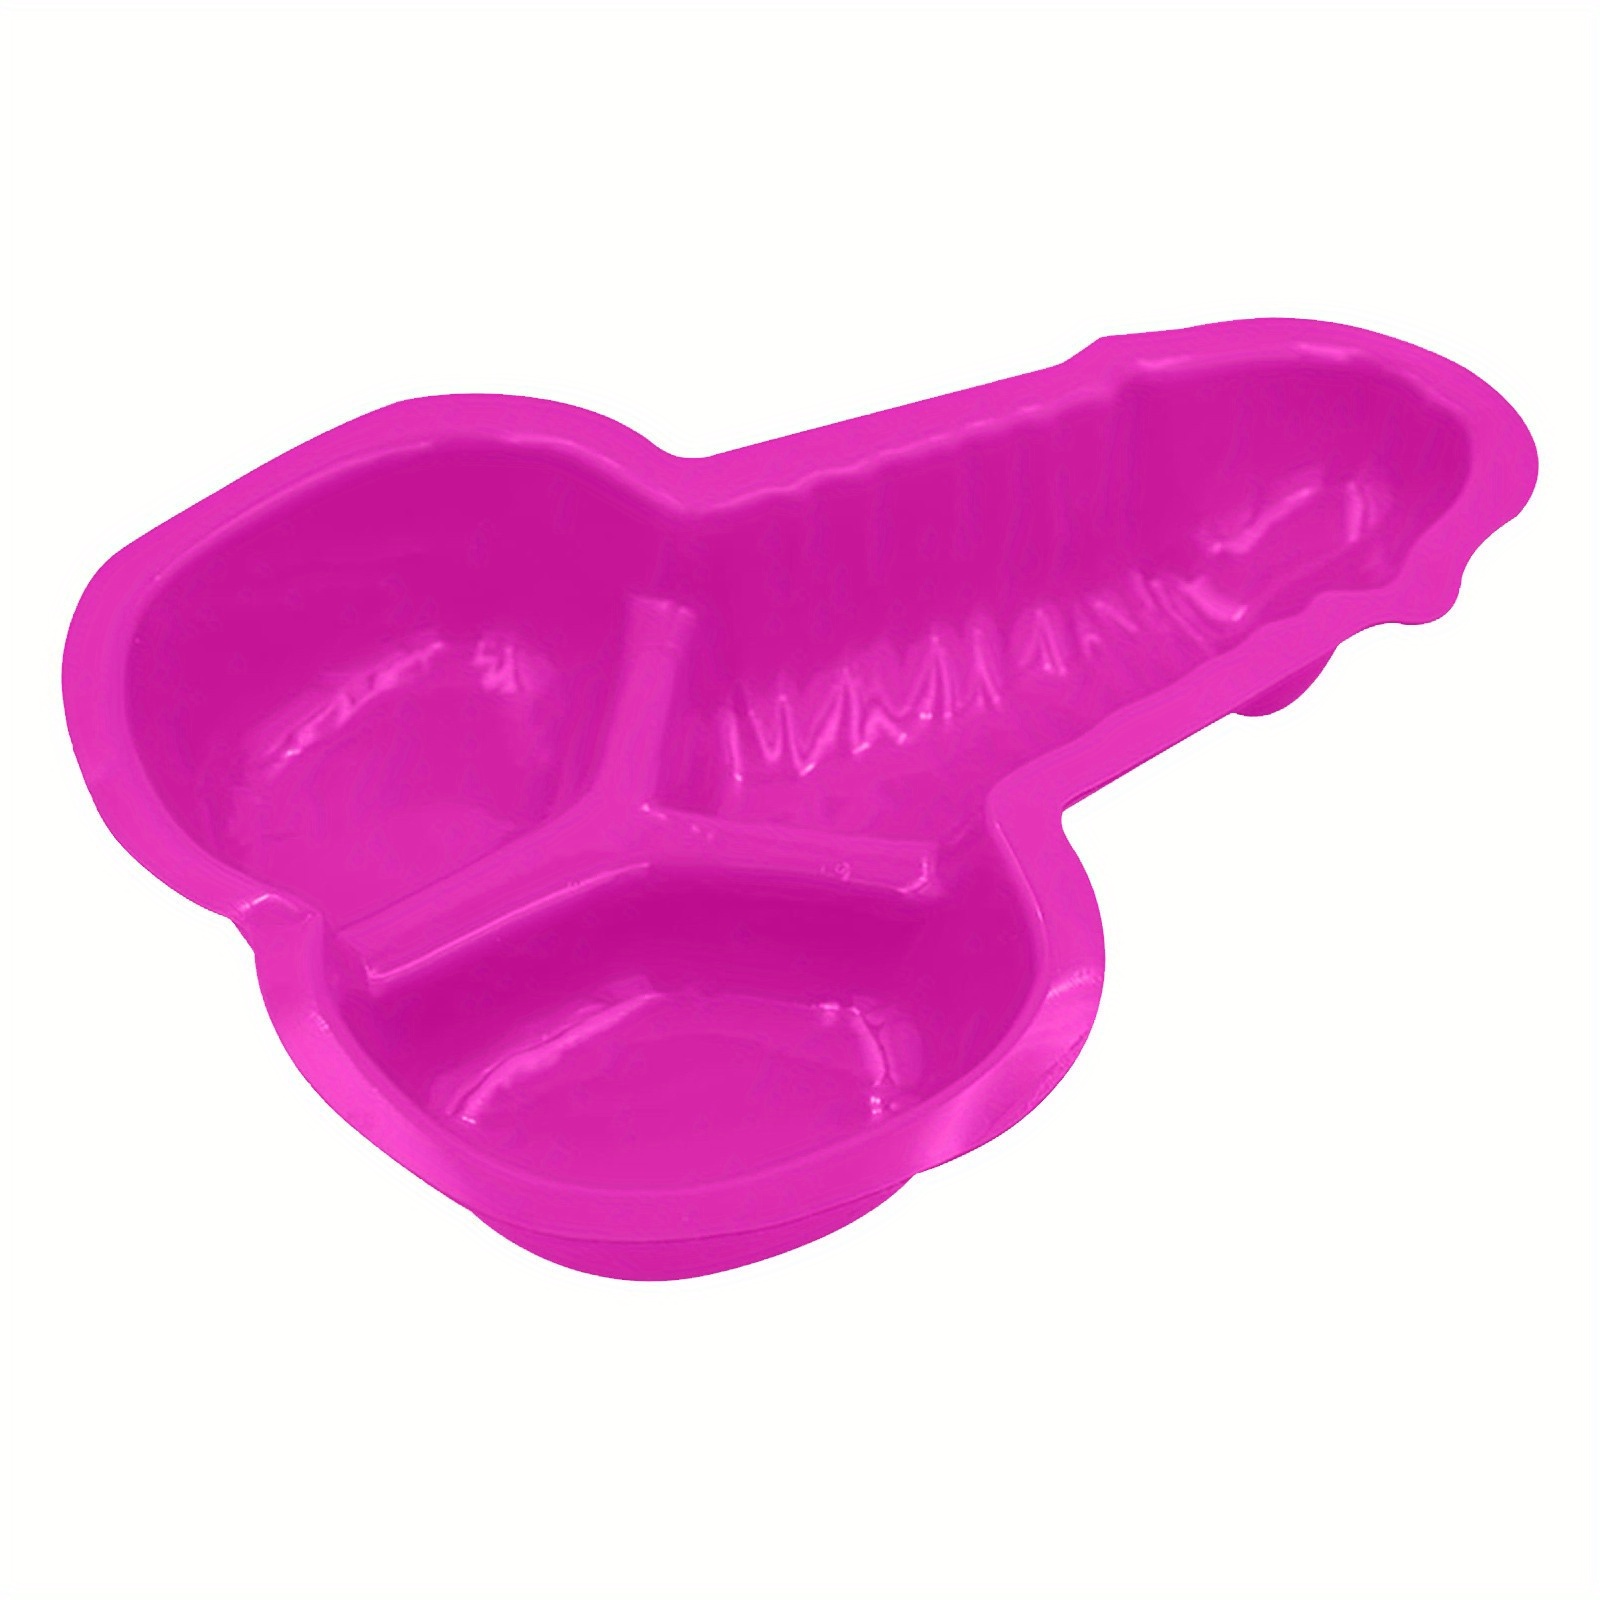 Penis-shaped Disposable Plates - 3 Compartment Dick-shaped